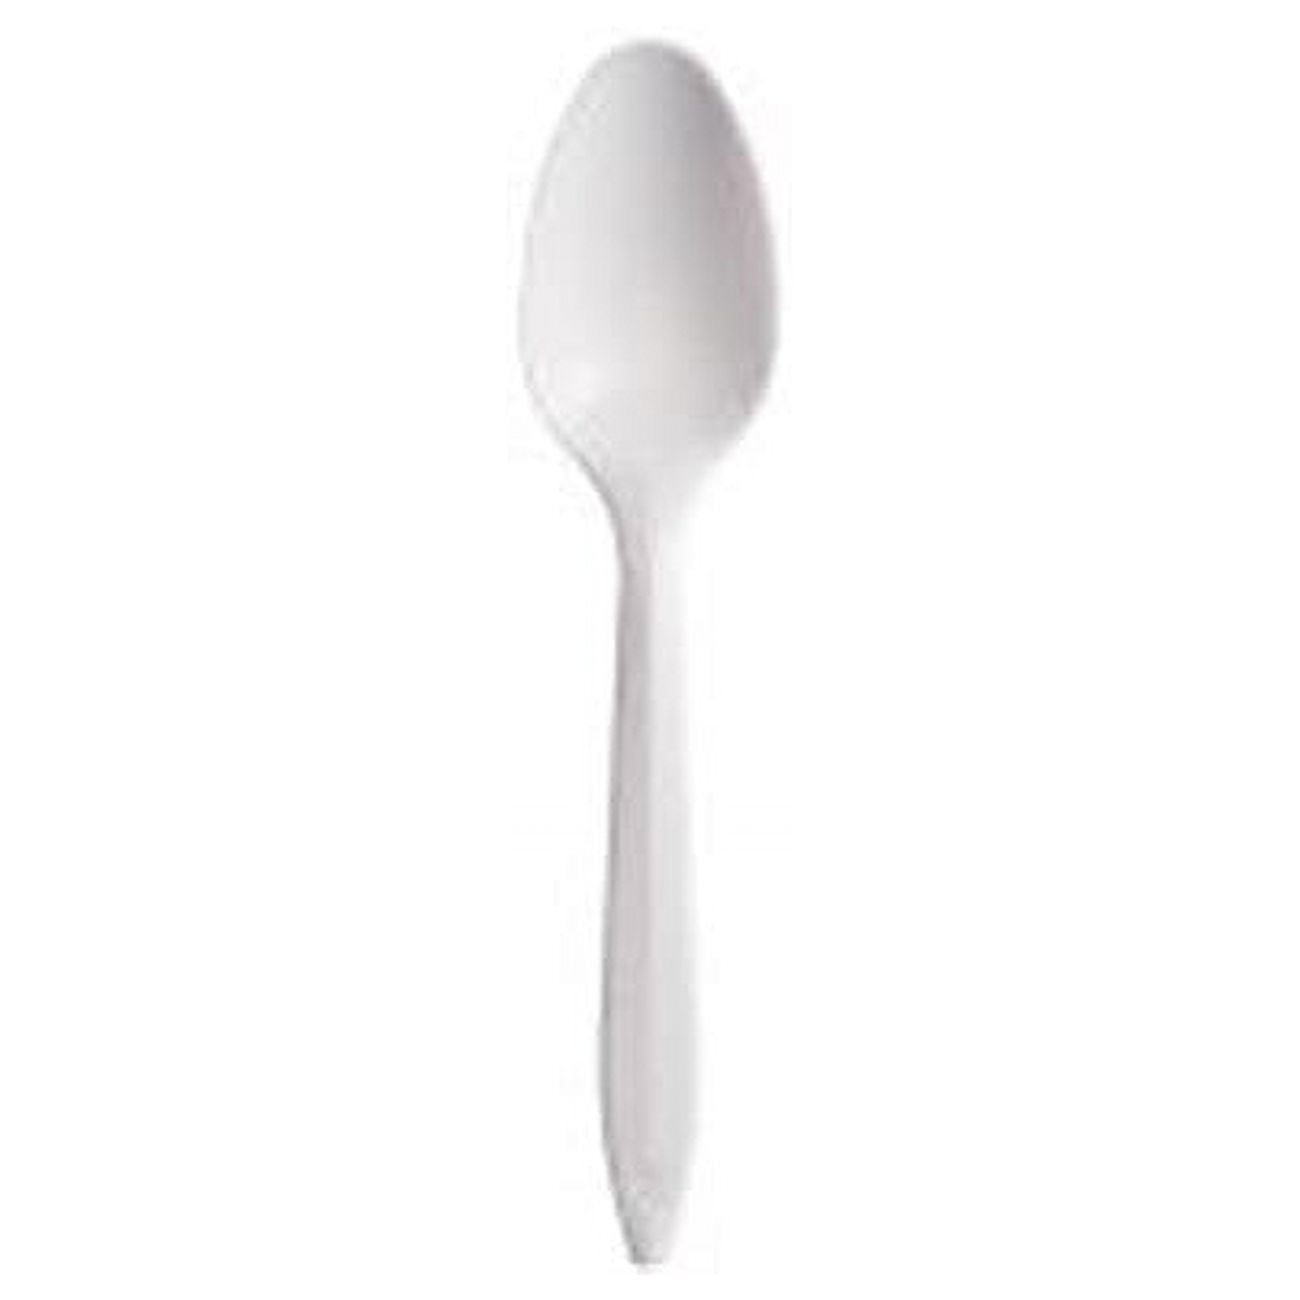 S6bw Cpc 5. 87 In. Style Setter Medium Weight Polypropylene Cutlery Teaspoon, White - Case Of 1000